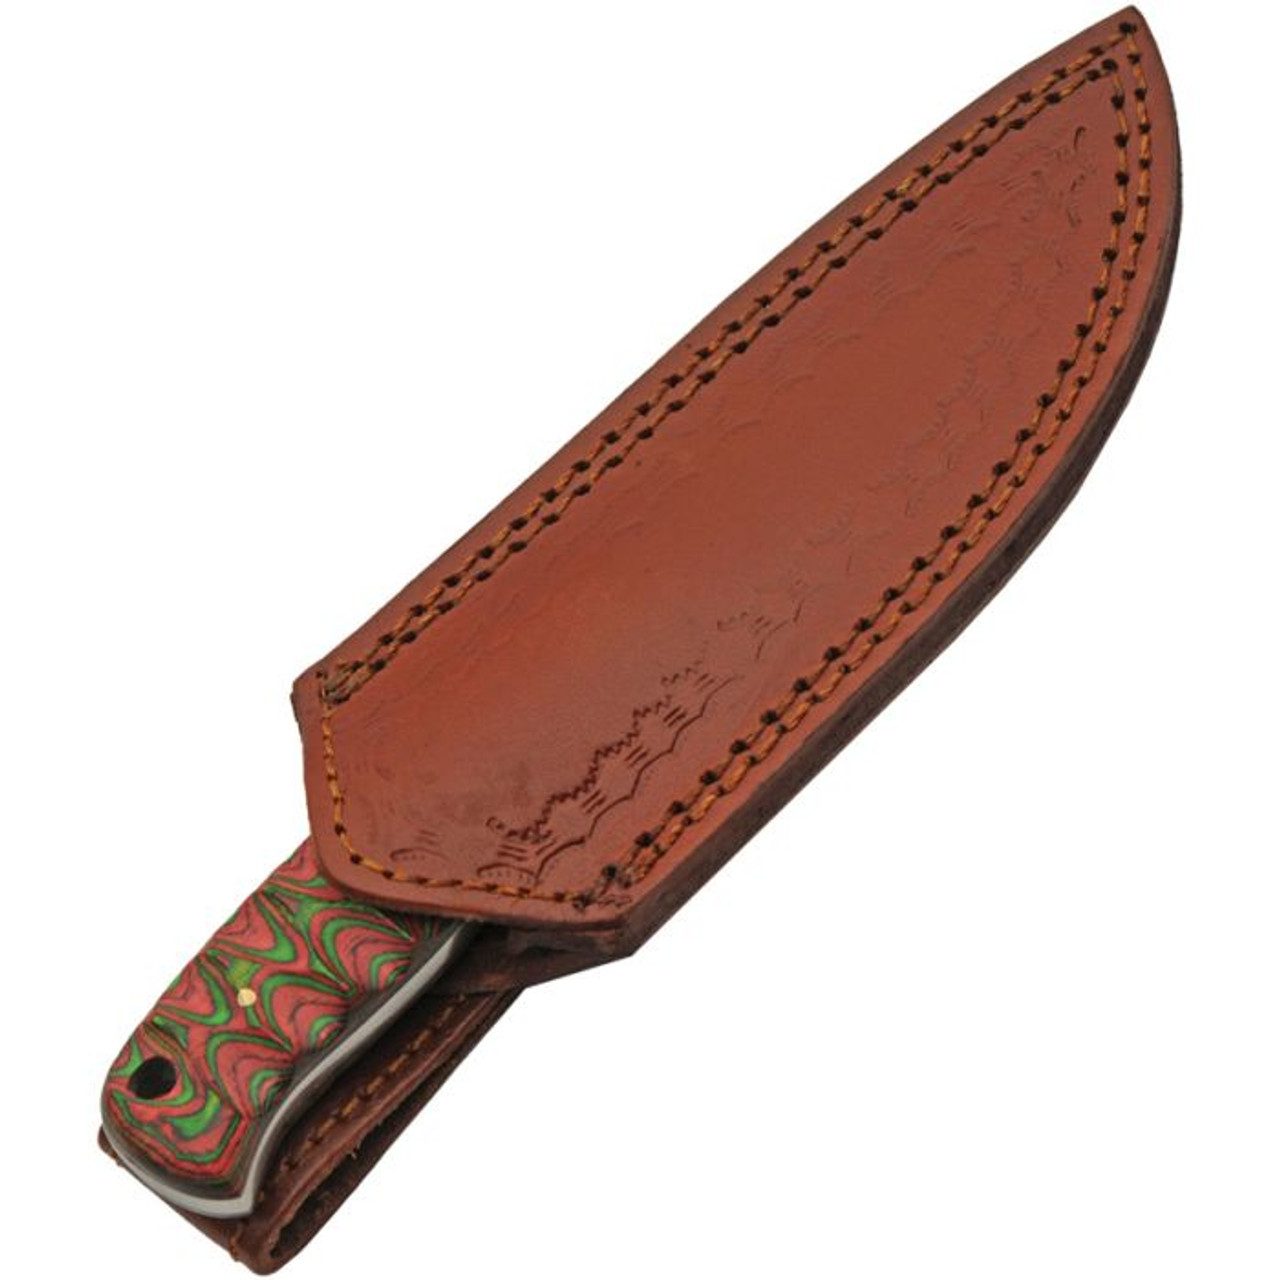 Damascus Knives Hunter (DM1376RD) 4" Damascus Drop Point Plain Blade, Red and Green Sculpted Wood Handle, Brown Leather Belt Sheath